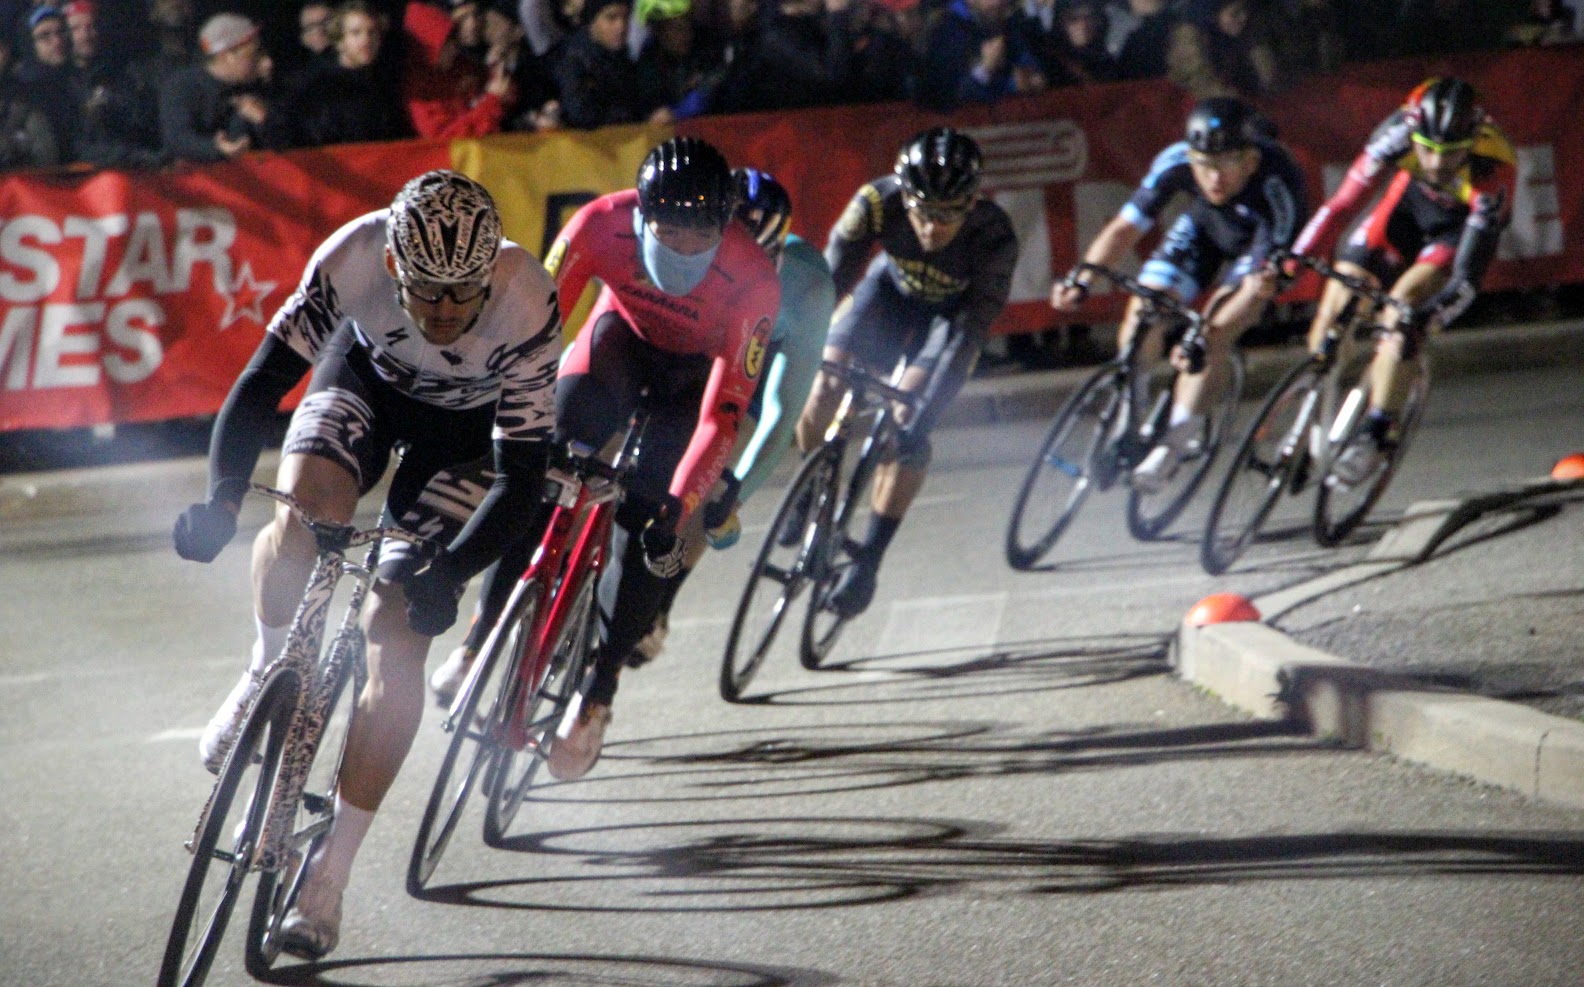 Red Hook Crit Red Hook Crit 2016 Crazy Crashes and Stunning Victories in Brooklyn